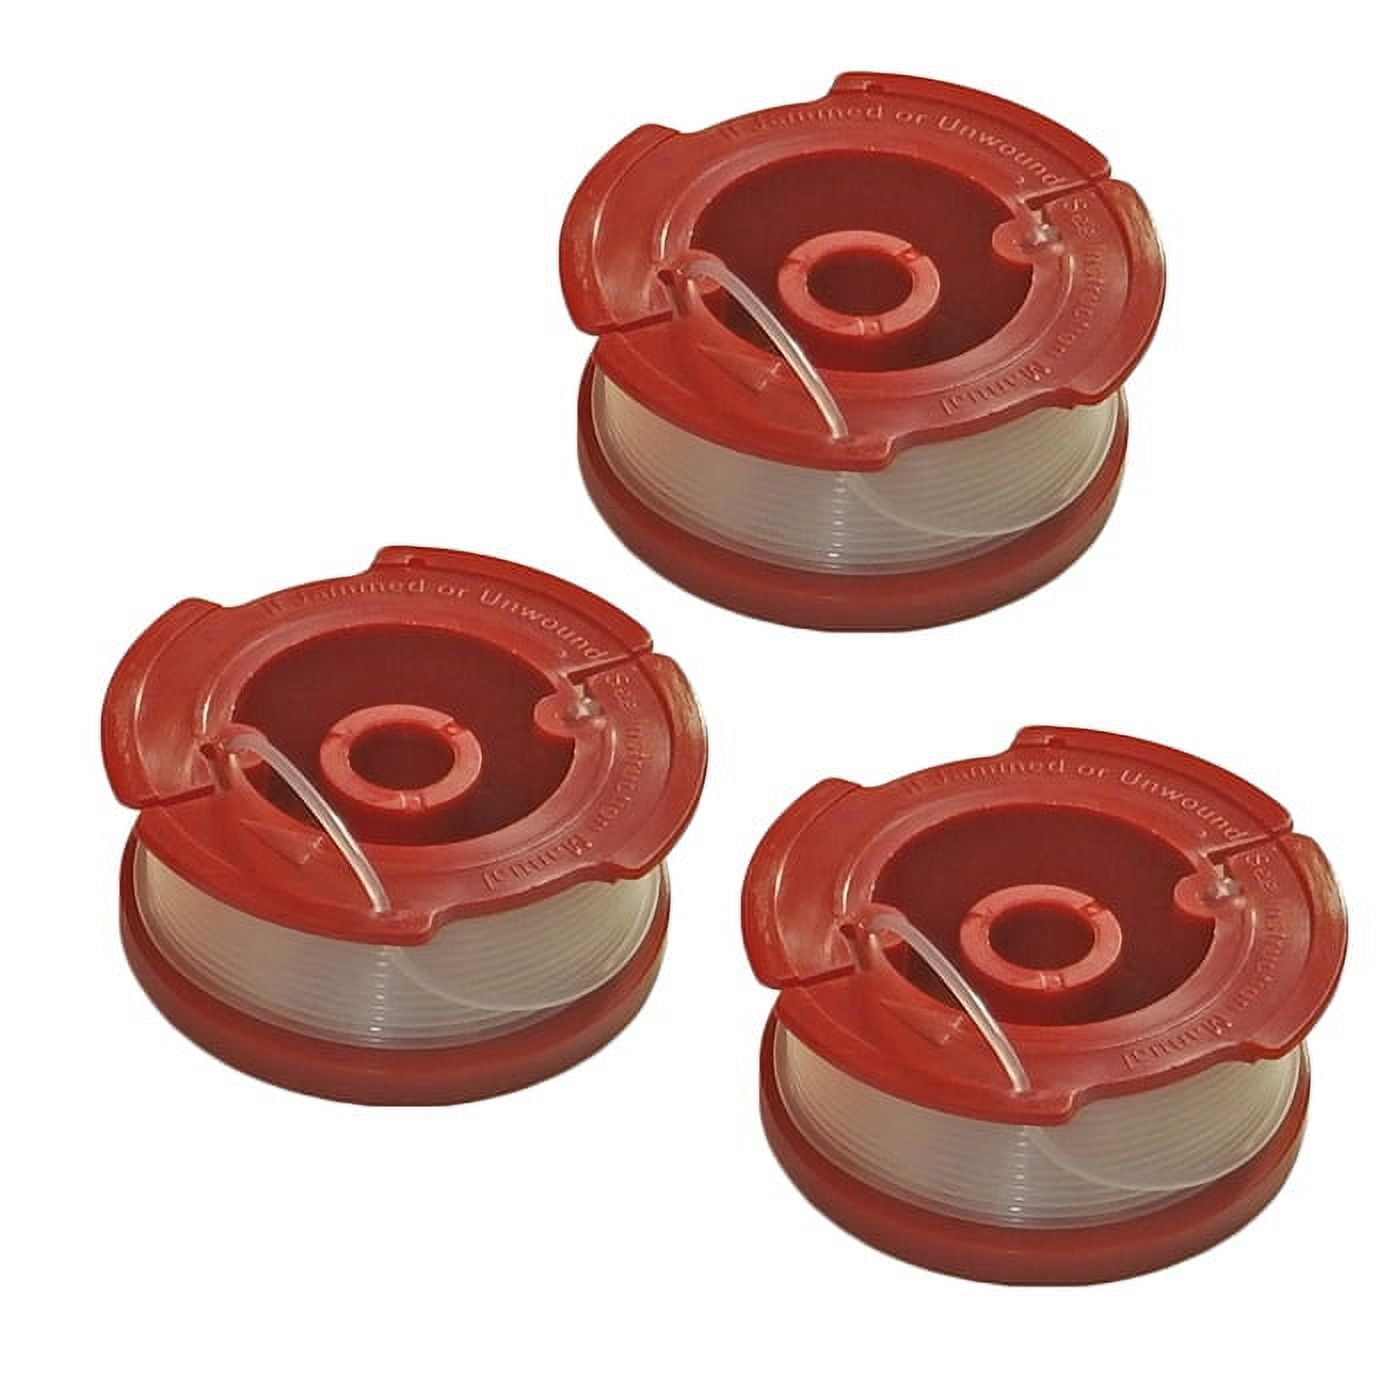 Kryc-6 Pack Line Spools With 2 Covers To Replace Black Decker Trimmers Replacement  Spool Auto Feed Trimmer Cap Af-chain 1006 Pack Spools With 2 Covers